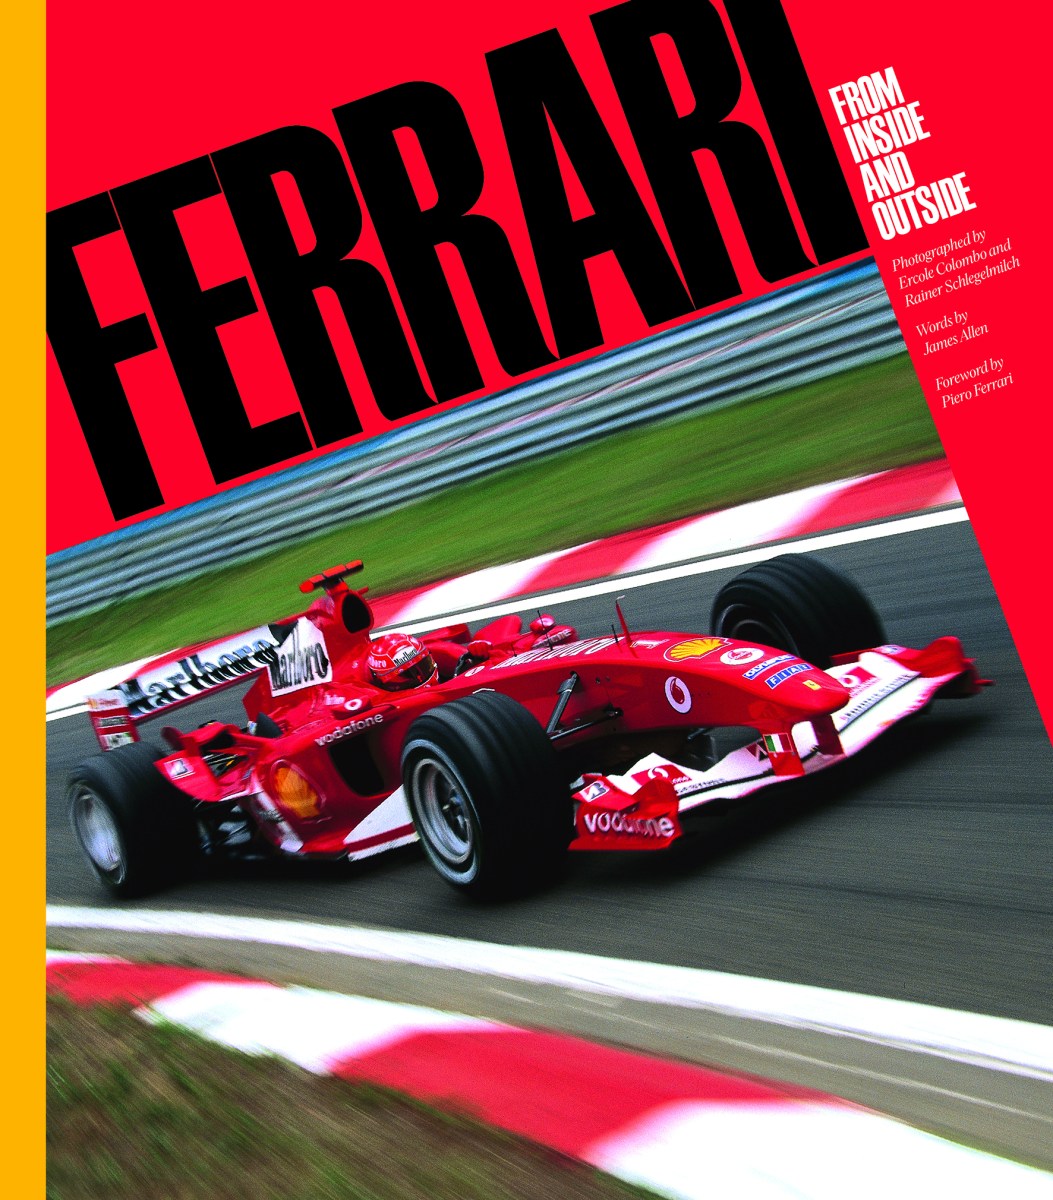 <p><span style="font-weight: 400">With director Michael Mann’s Enzo Ferrari biopic generating plenty of buzz before it hits theaters in December, the history of Italian Formula 1 racing is having a moment — which makes now the perfect time to peek inside <em><a href="https://www.amazon.com/Ferrari-Inside-Outside-James-Allen/dp/1788842103/ref=sr_1_2?crid=Z62221IE5OSK&keywords=ferrari+acc+art+books&qid=1690830738&sprefix=ferrari+acc+art+book%2Caps%2C87&sr=8-2&ufe=app_do%3Aamzn1.fos.006c50ae-5d4c-4777-9bc0-4513d670b6bc&tag=insid029-20&tag=insid029-20">Ferrari: From Inside and Outside</a> </em>from </span><span style="font-weight: 400">Michael Schumacher's biographer James Allen and ACC Art Books. Featuring hundreds of stunning images from legendary photographers Rainer Schlegelmilch and Ercole Colombo, the book provides an intimate look at Ferrari's involvement with F1 from the 1960s onwards. Herein, Allen breaks down 13 of the best photographs.</span></p>